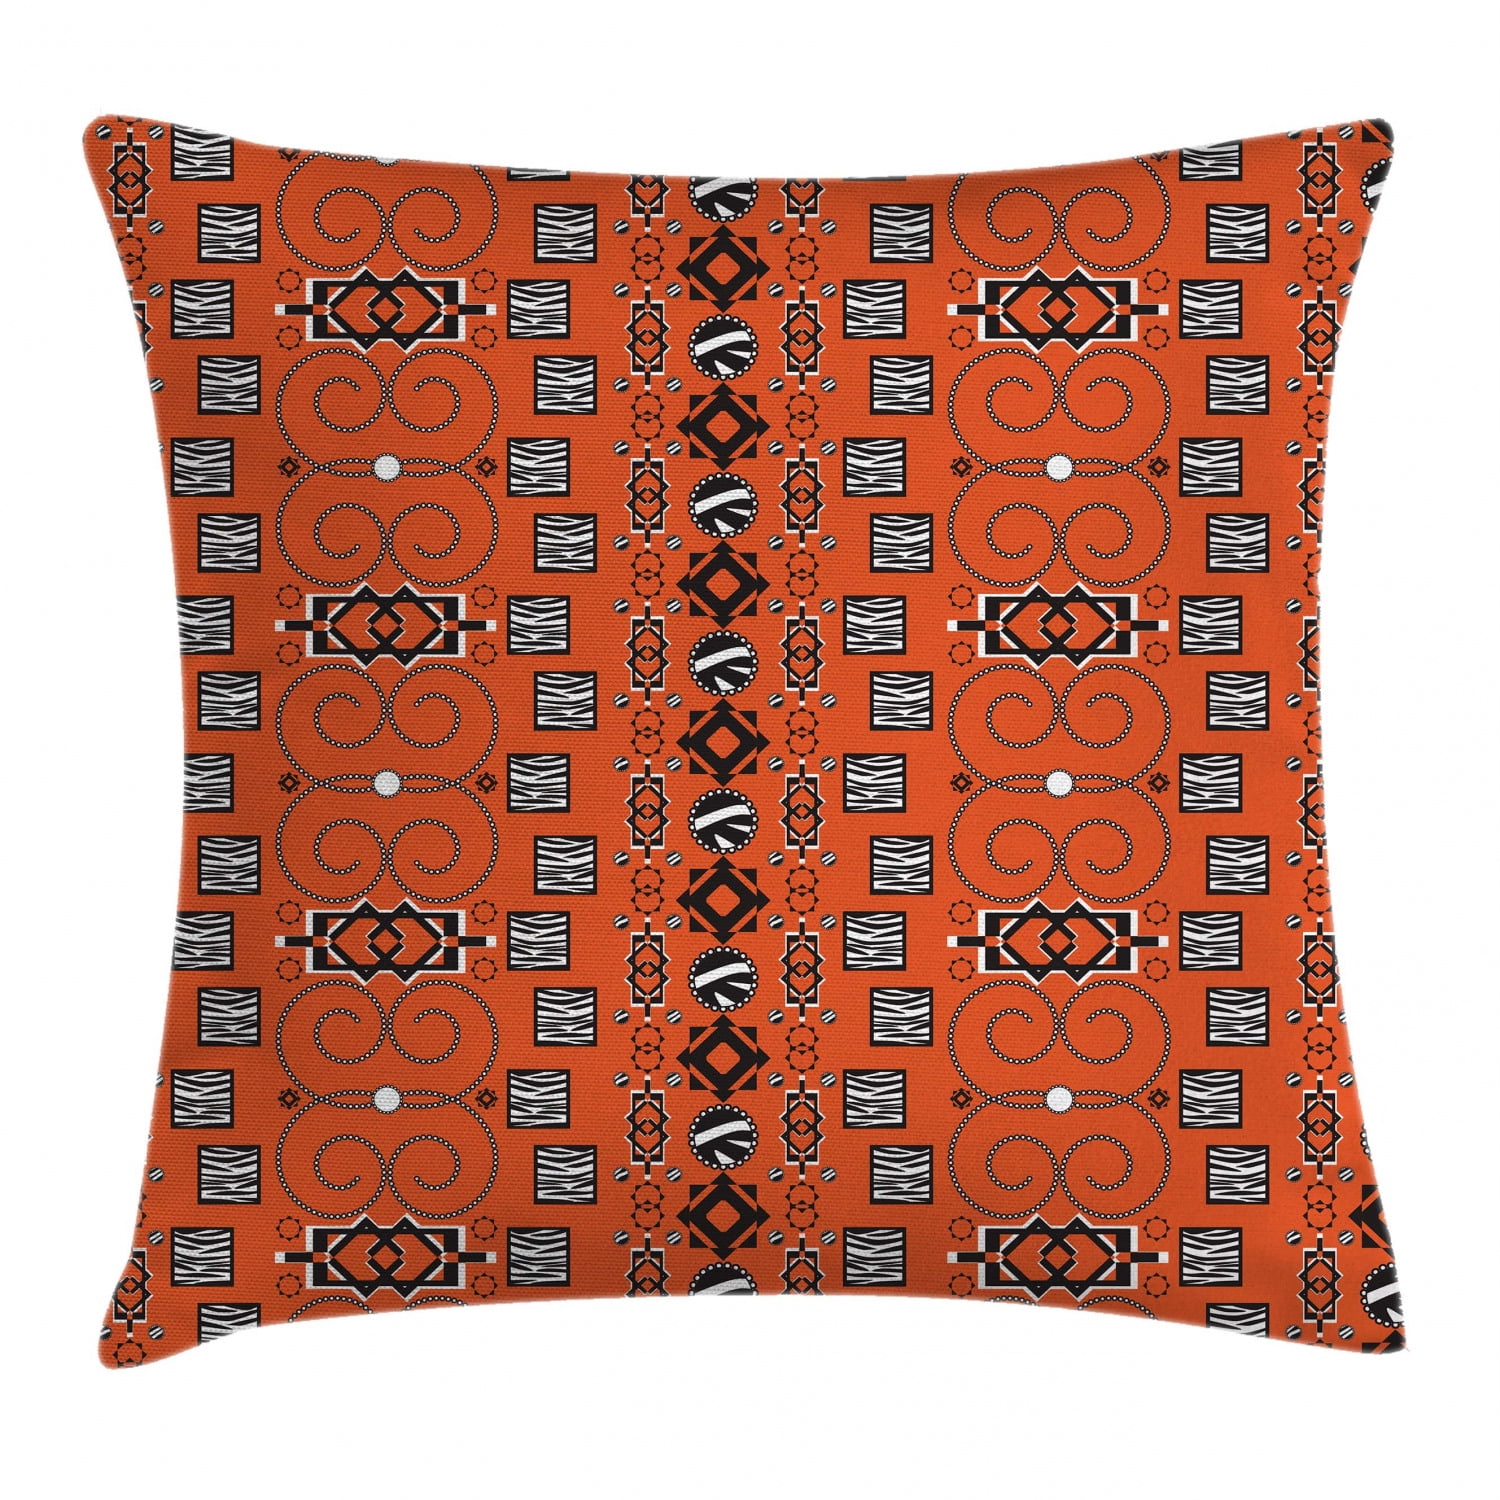 Ethnic Style Cushion Cover African Tribal Geometric Pattern Decorative Pillow 